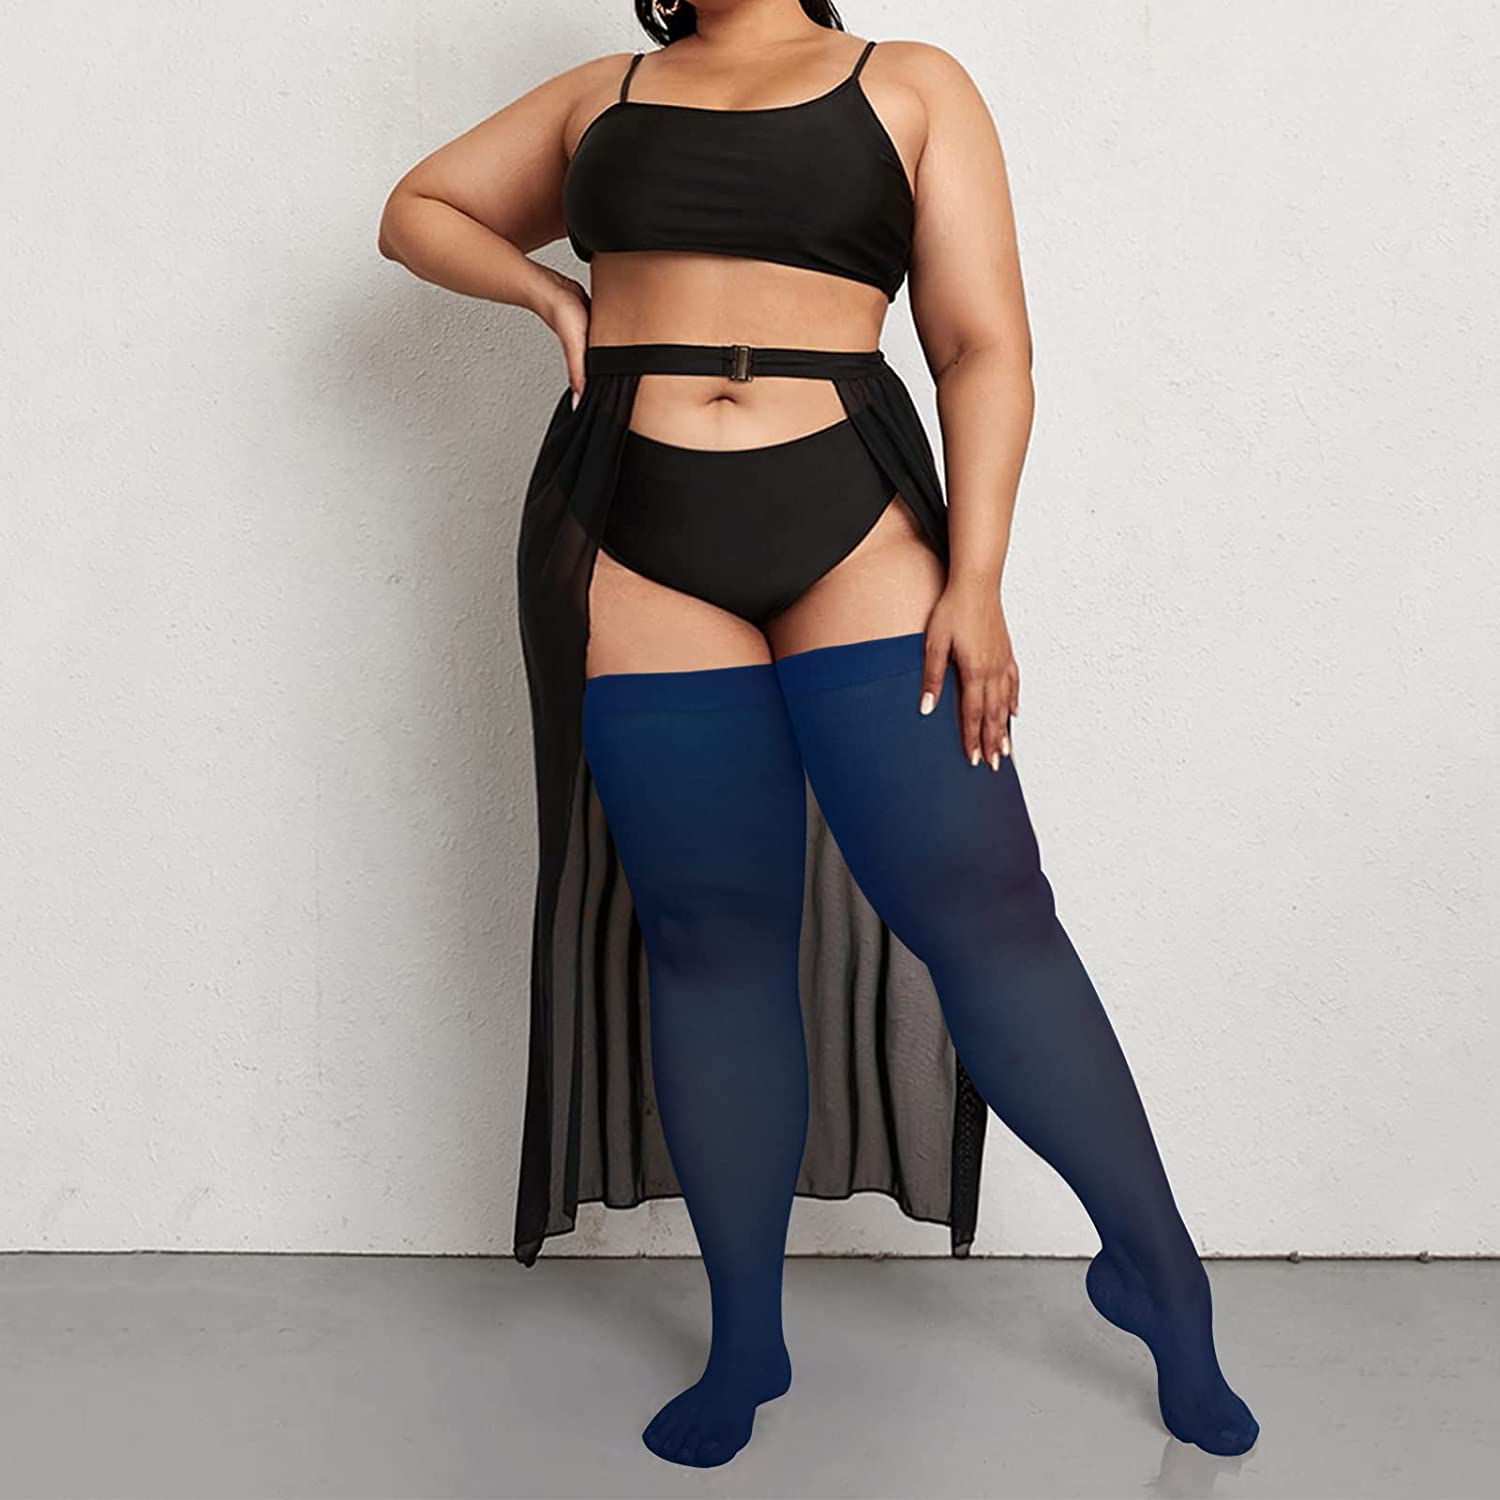 Plus Size Thigh High Stockings - Moon Wood